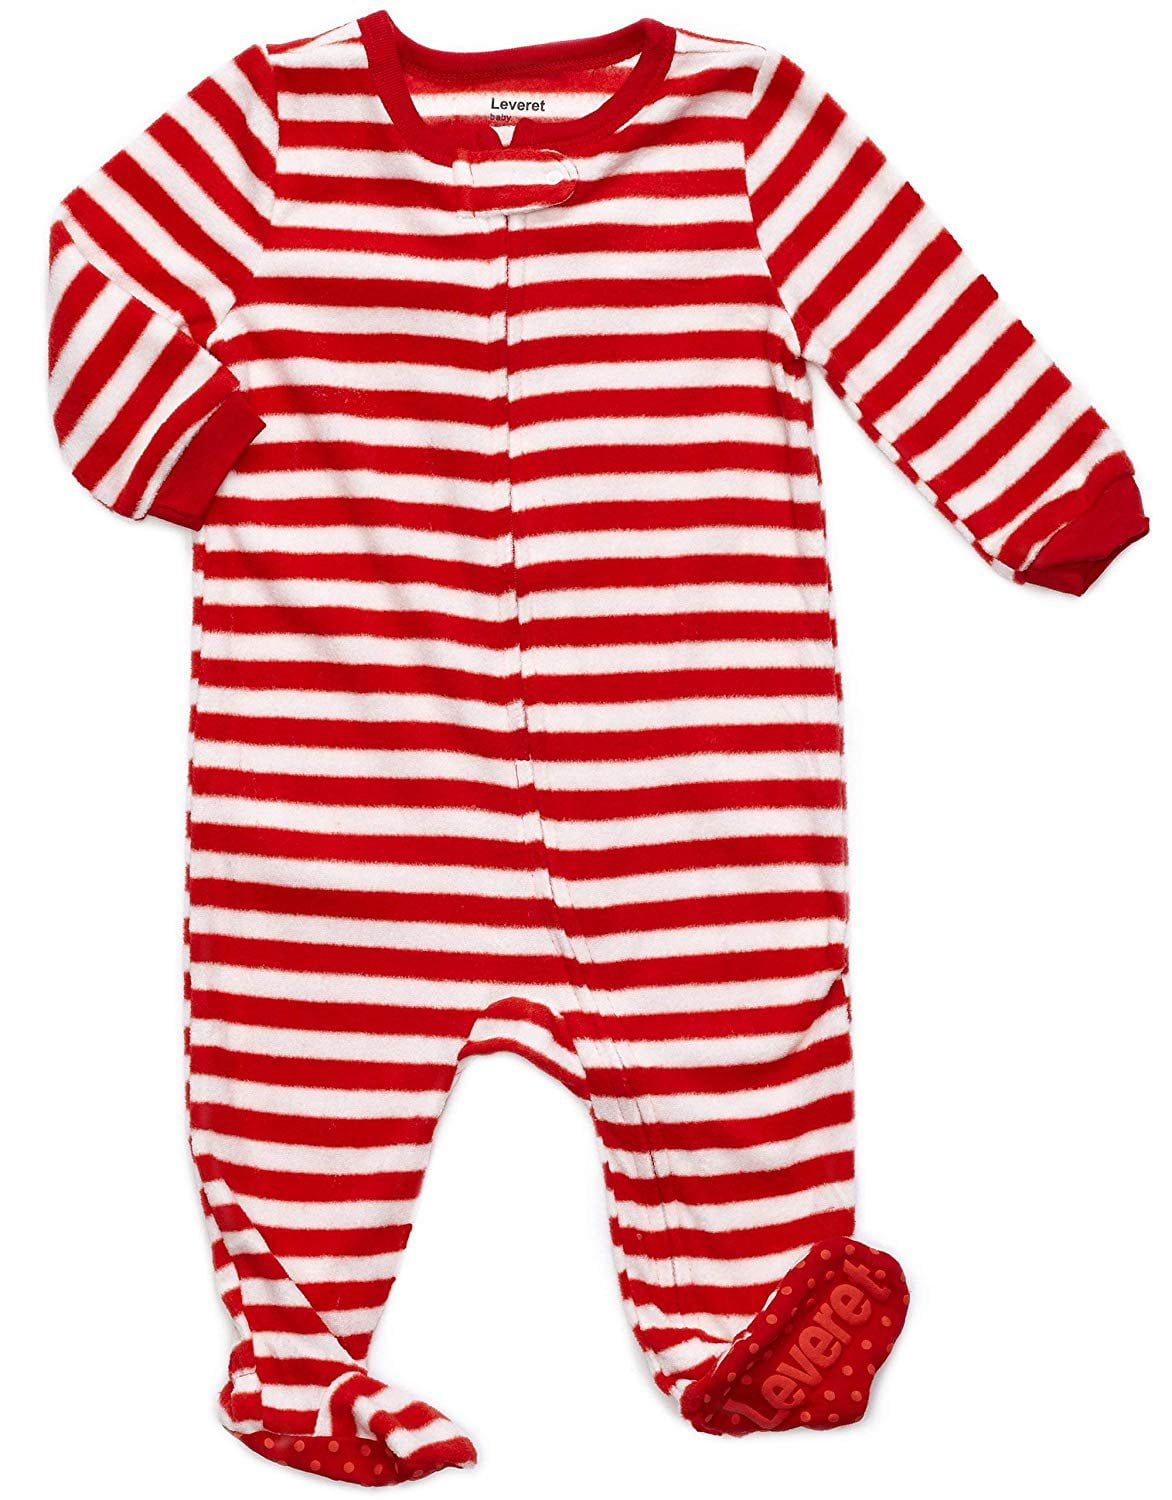 Leveret Baby Boys Girls Christmas Red & White Striped Footed Pajamas 6M-5Y 